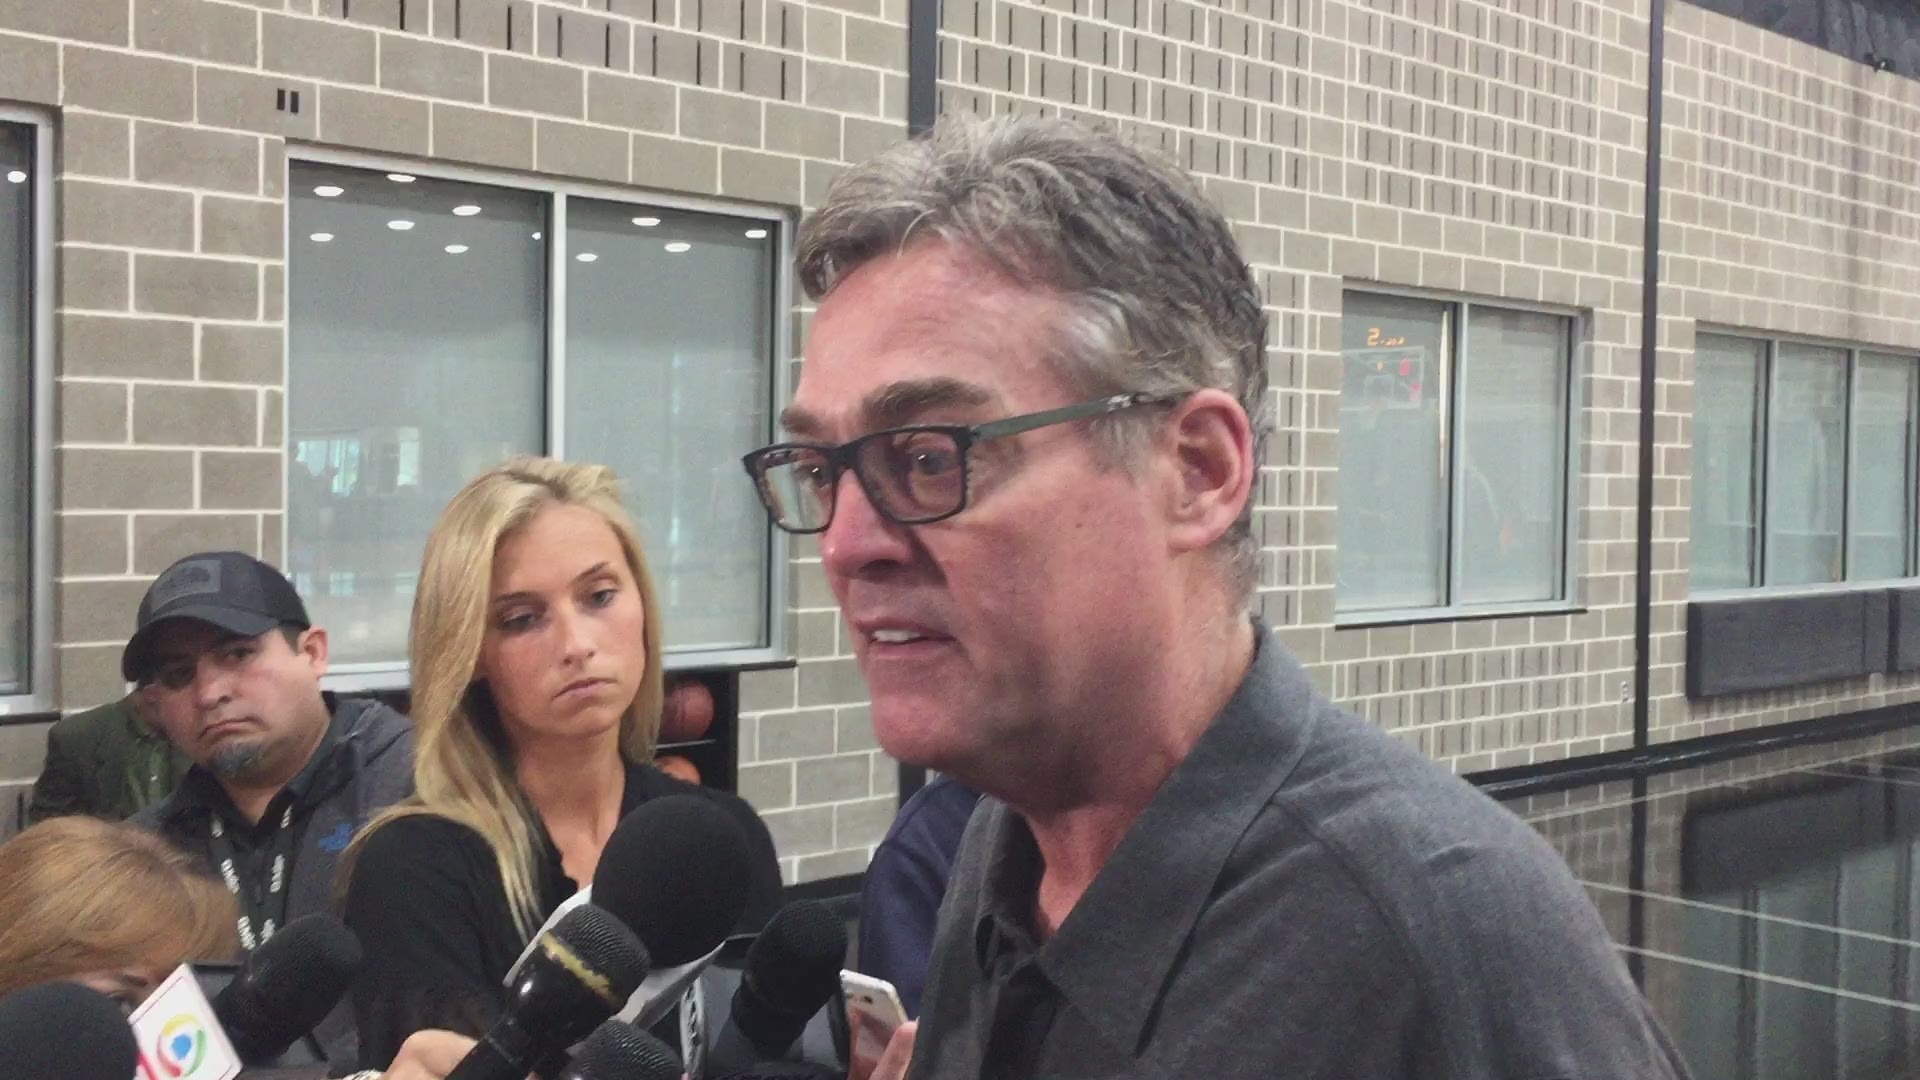 Spurs GM RC Buford speaks to the media after the Spurs shootaround on Thursday, April 19.